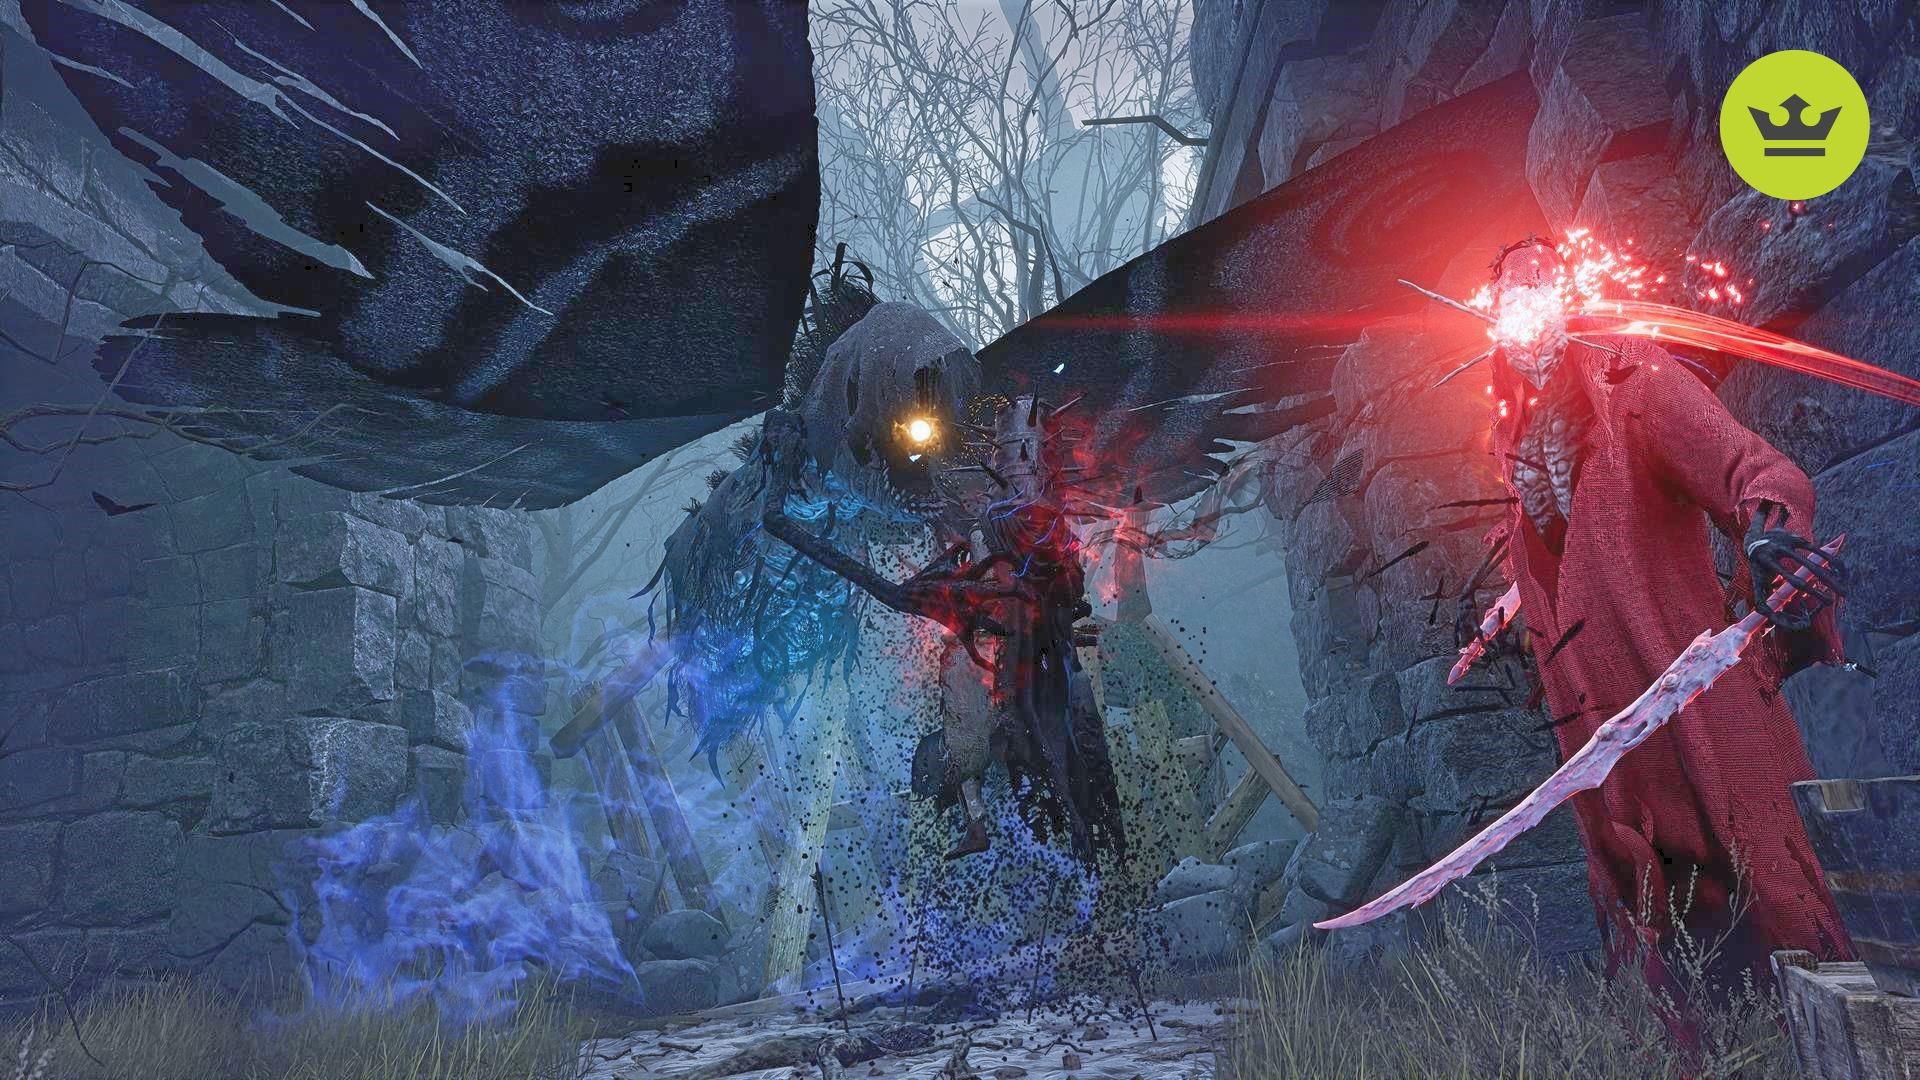 Lords of the Fallen Review – An Excellent Soulslike